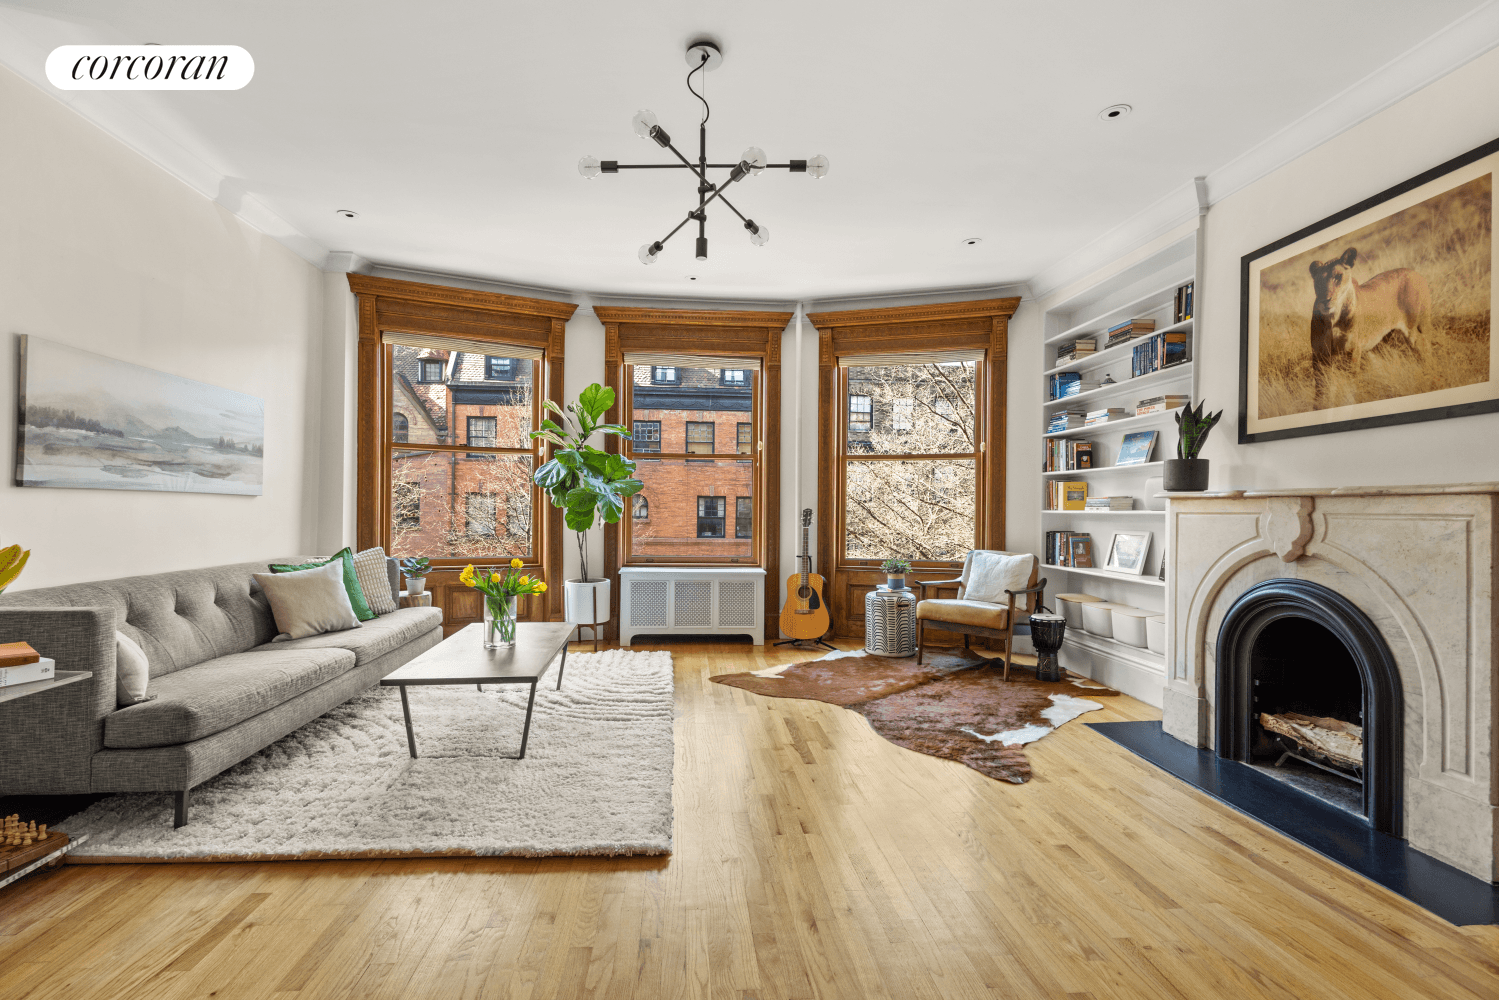 Enjoy a sun drenched and expansive living space in this thoughtfully renovated two bedroom coop in the prime of Park Slope between 8th Avenue and Prospect Park West.